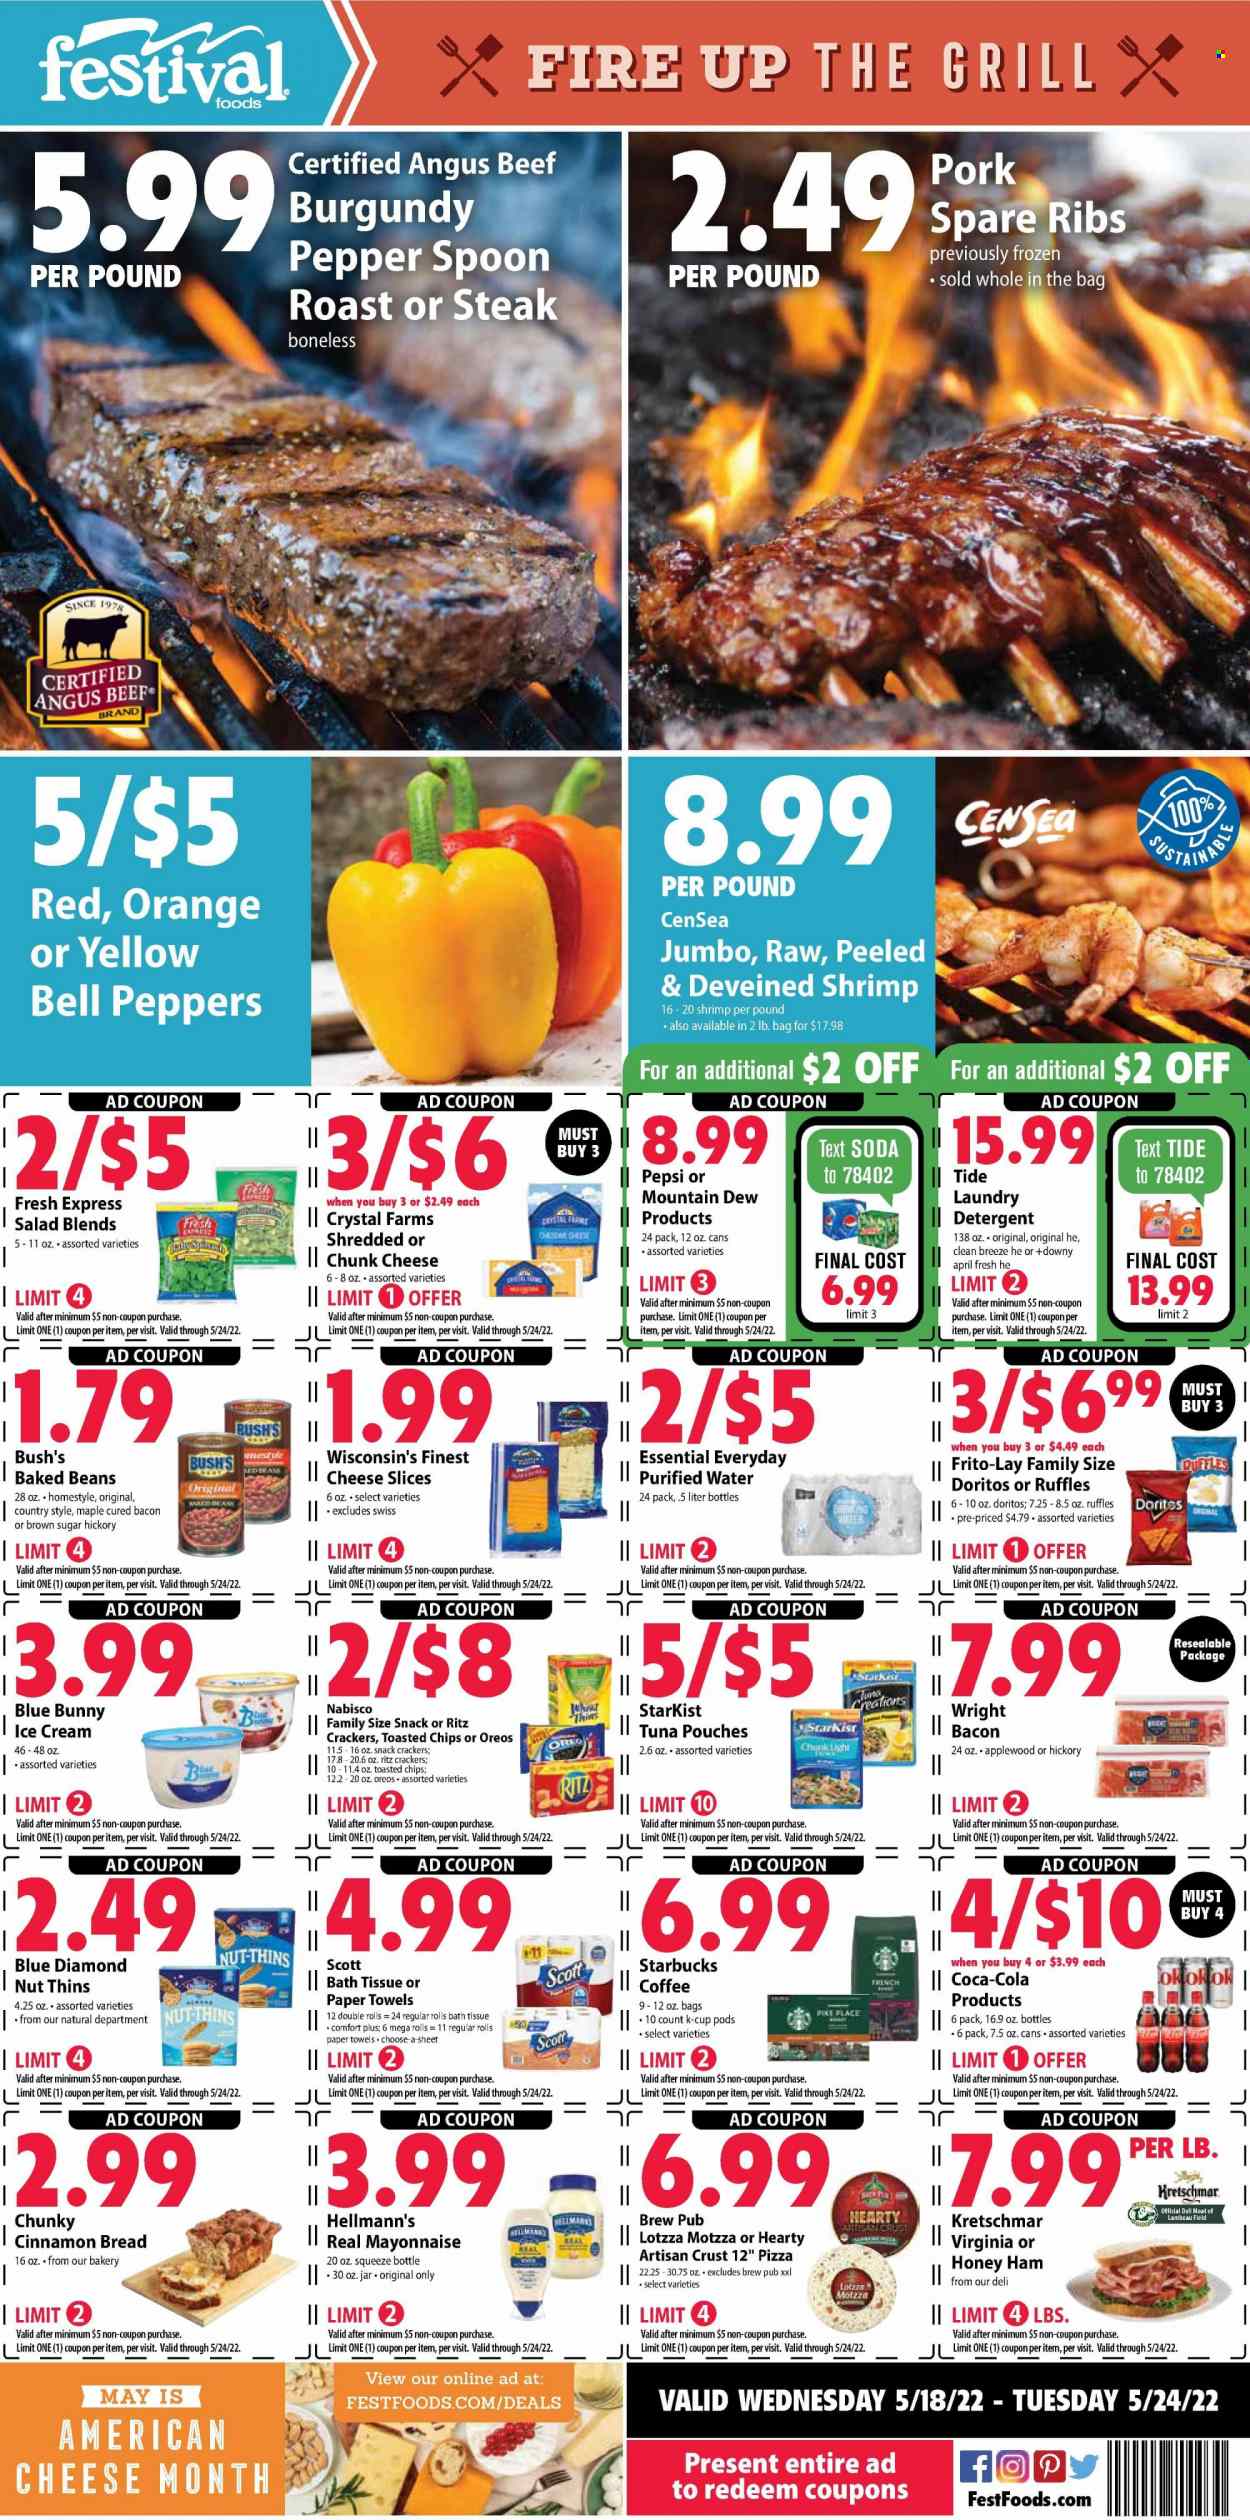 thumbnail - Festival Foods Flyer - 05/18/2022 - 05/24/2022 - Sales products - bread, bell peppers, salad, peppers, oranges, tuna, shrimps, StarKist, pizza, bacon, ham, american cheese, sliced cheese, chunk cheese, Oreo, mayonnaise, Hellmann’s, ice cream, Blue Bunny, snack, crackers, RITZ, Doritos, Thins, Frito-Lay, Ruffles, baked beans, cinnamon, Blue Diamond, Coca-Cola, Mountain Dew, Pepsi, soda, purified water, coffee, Starbucks, coffee capsules, K-Cups, beef meat, steak, pork spare ribs, bath tissue, Scott, kitchen towels, paper towels, detergent, Tide. Page 1.